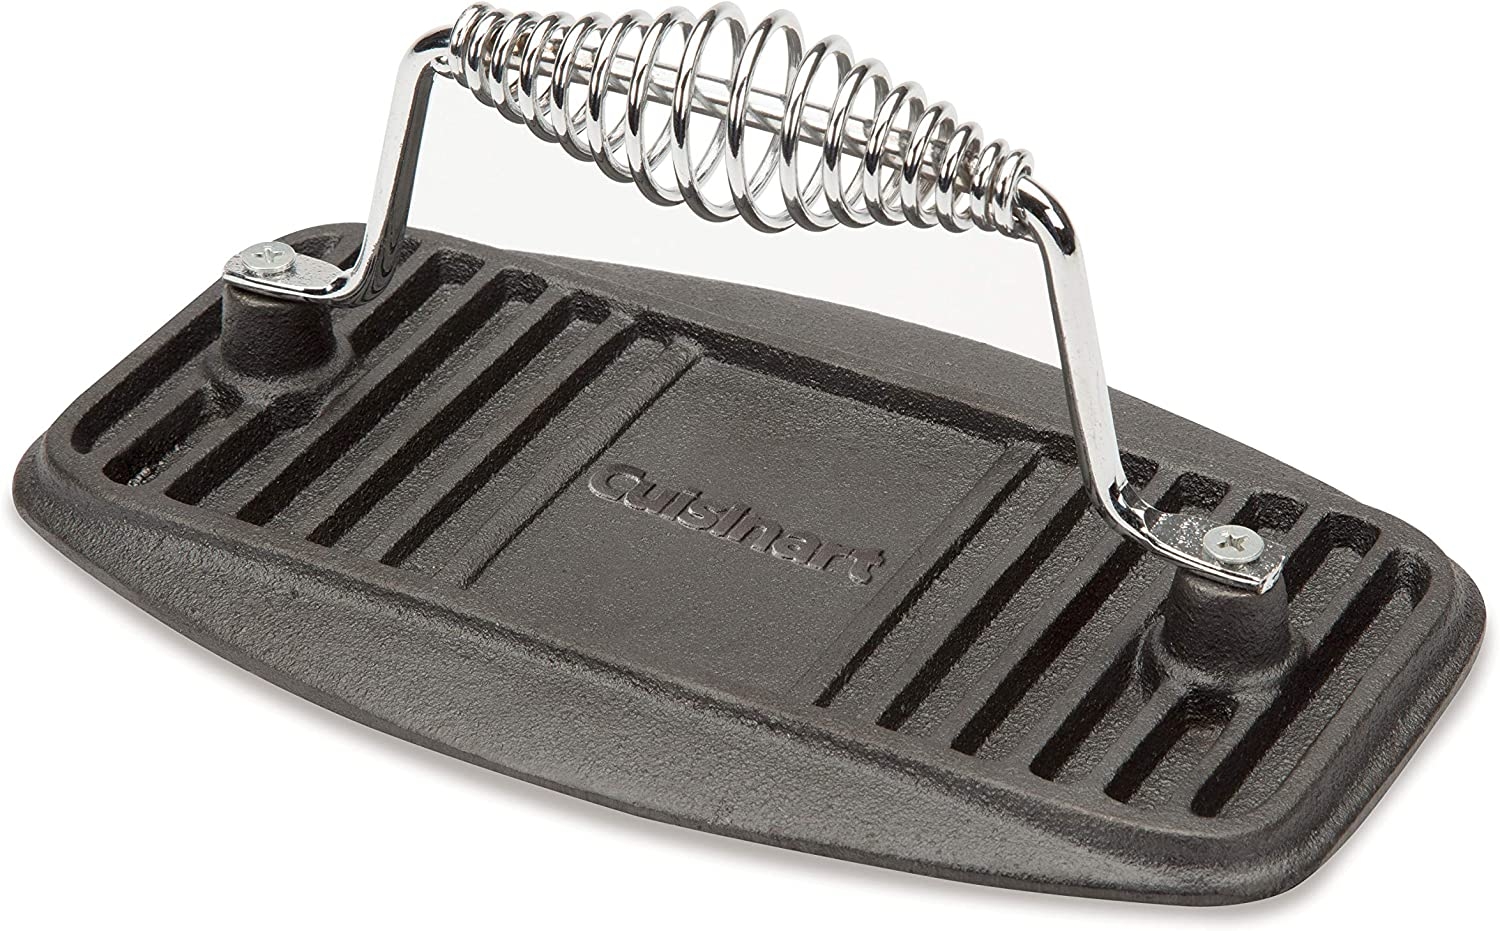 Cuisinart CGPR-221 Cast Iron Grill Press (Wood Handle), Weighs 2.8-pounds Import To Shop ×Product customization General